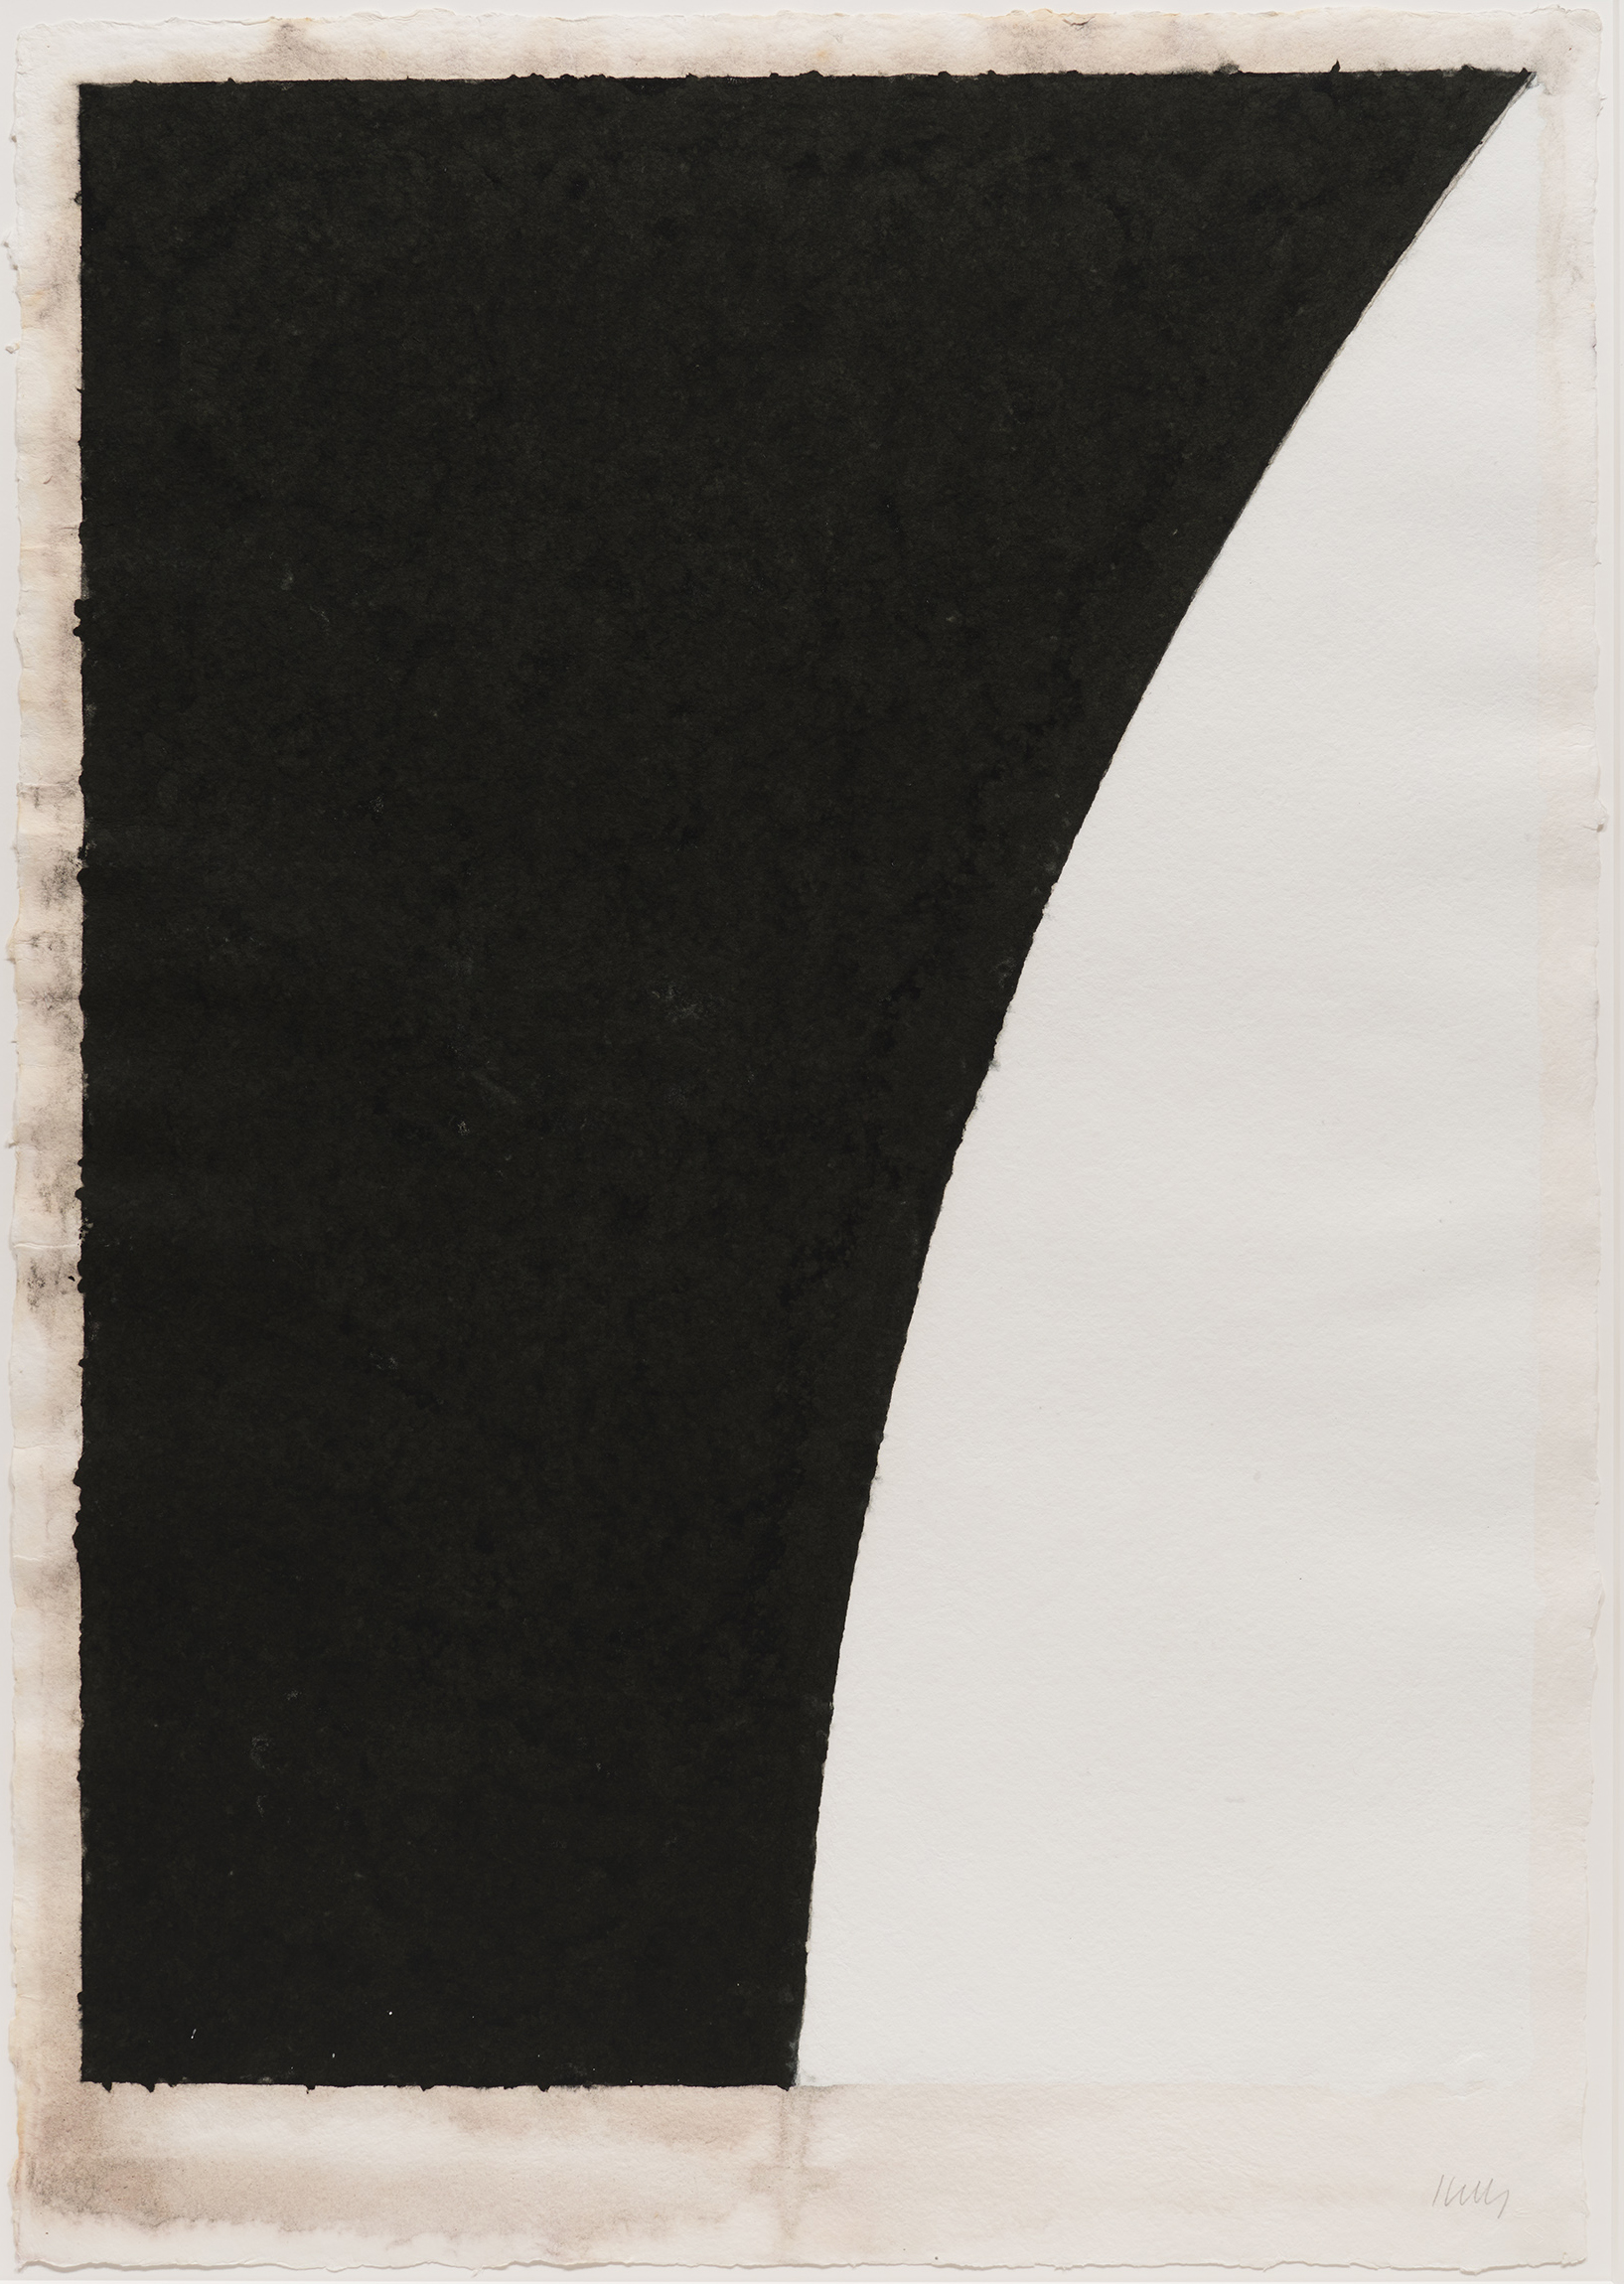 Colored Paper Image VI (White Curve with Black II) by Ellsworth Kelly